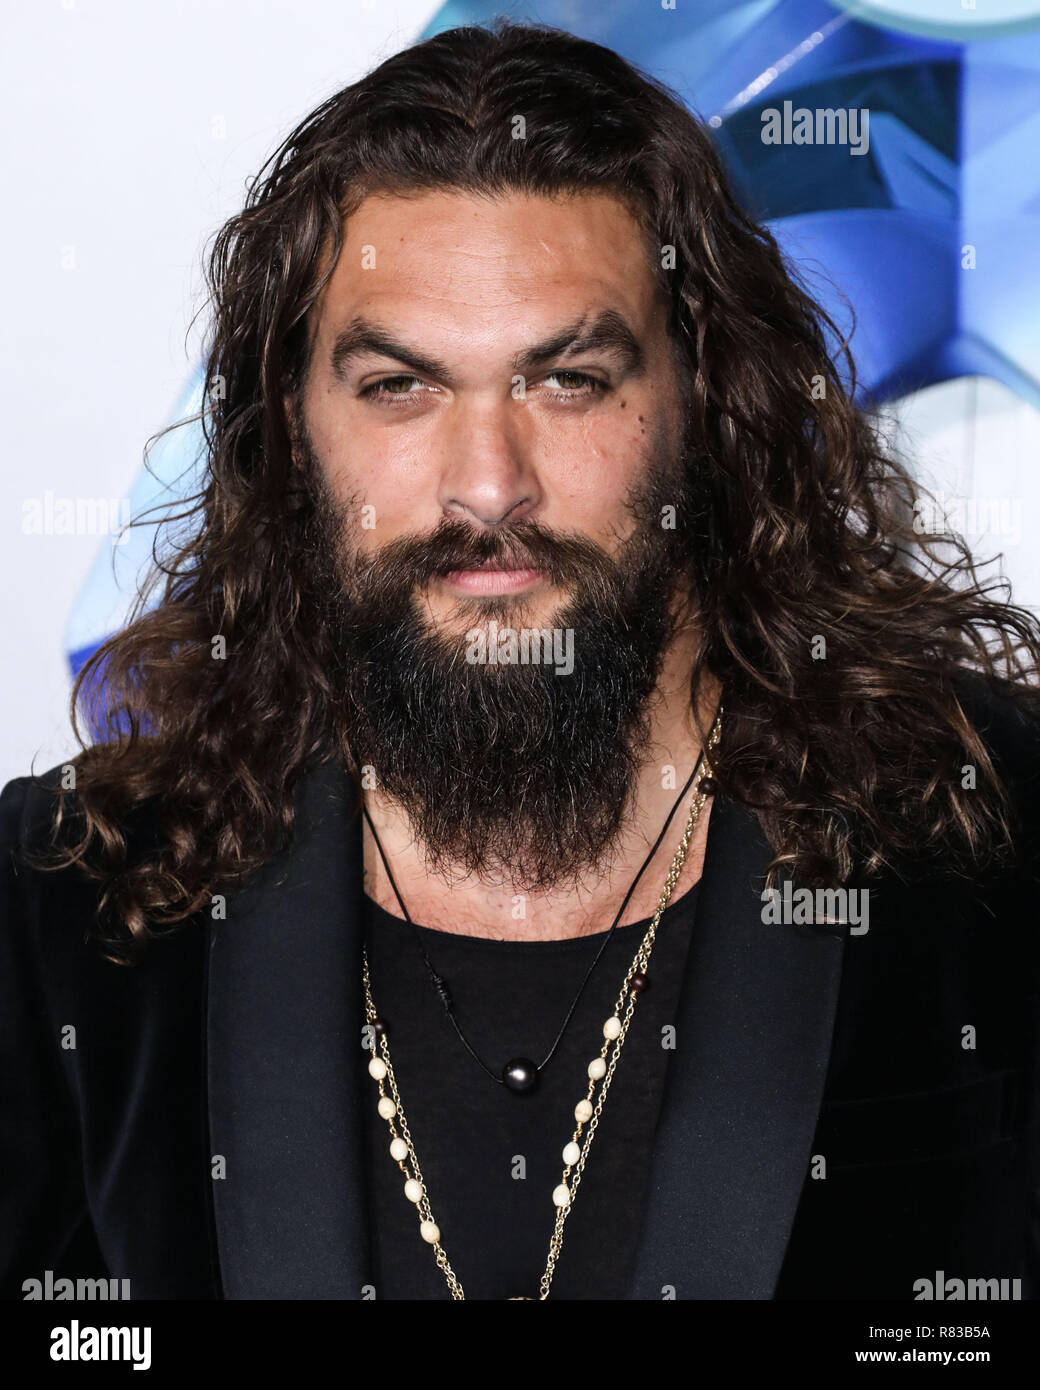 Los Angeles, USA. 12th Dec 2018, Actor Jason Momoa arrives at the Los  Angeles Premiere Of Warner Bros. Pictures' 'Aquaman' held at the TCL  Chinese Theatre IMAX on December 12, 2018 in